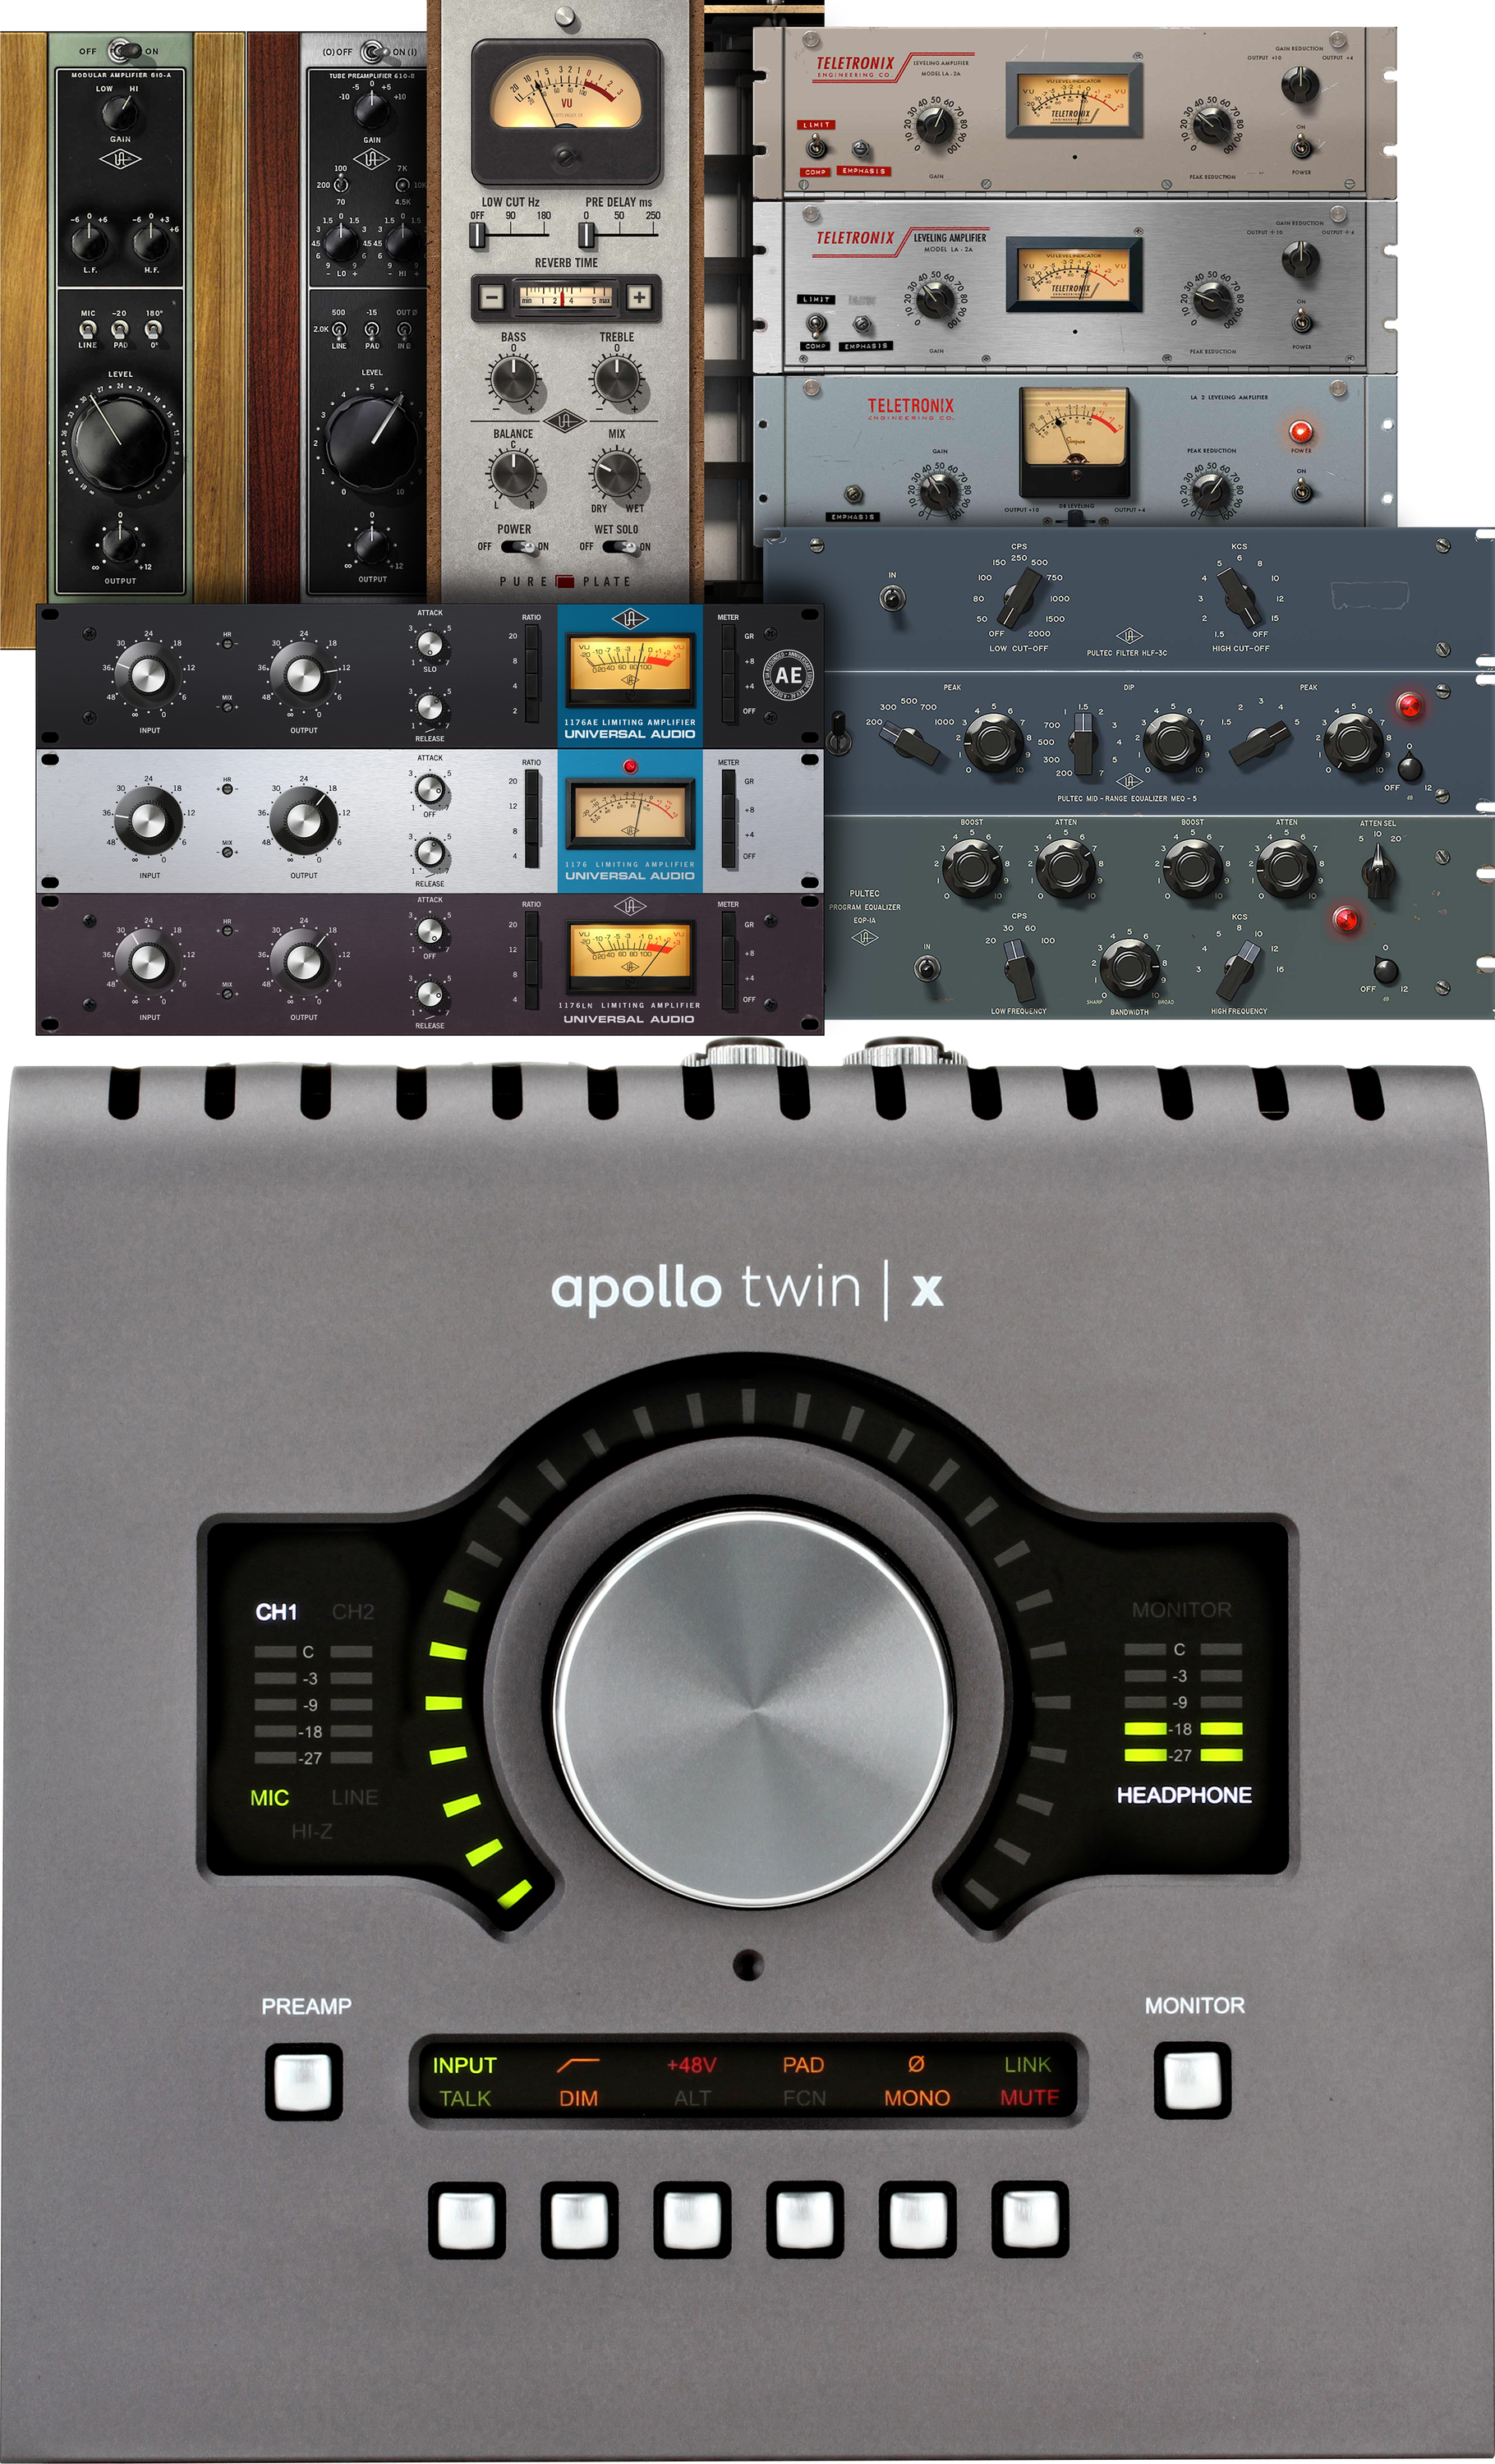 Universal Audio Apollo Twin X Duo HE Bundle 10x6 Thunderbolt Interface With  Shure SM7B Mic, SRH440A Headphones And 25' Mic Cable